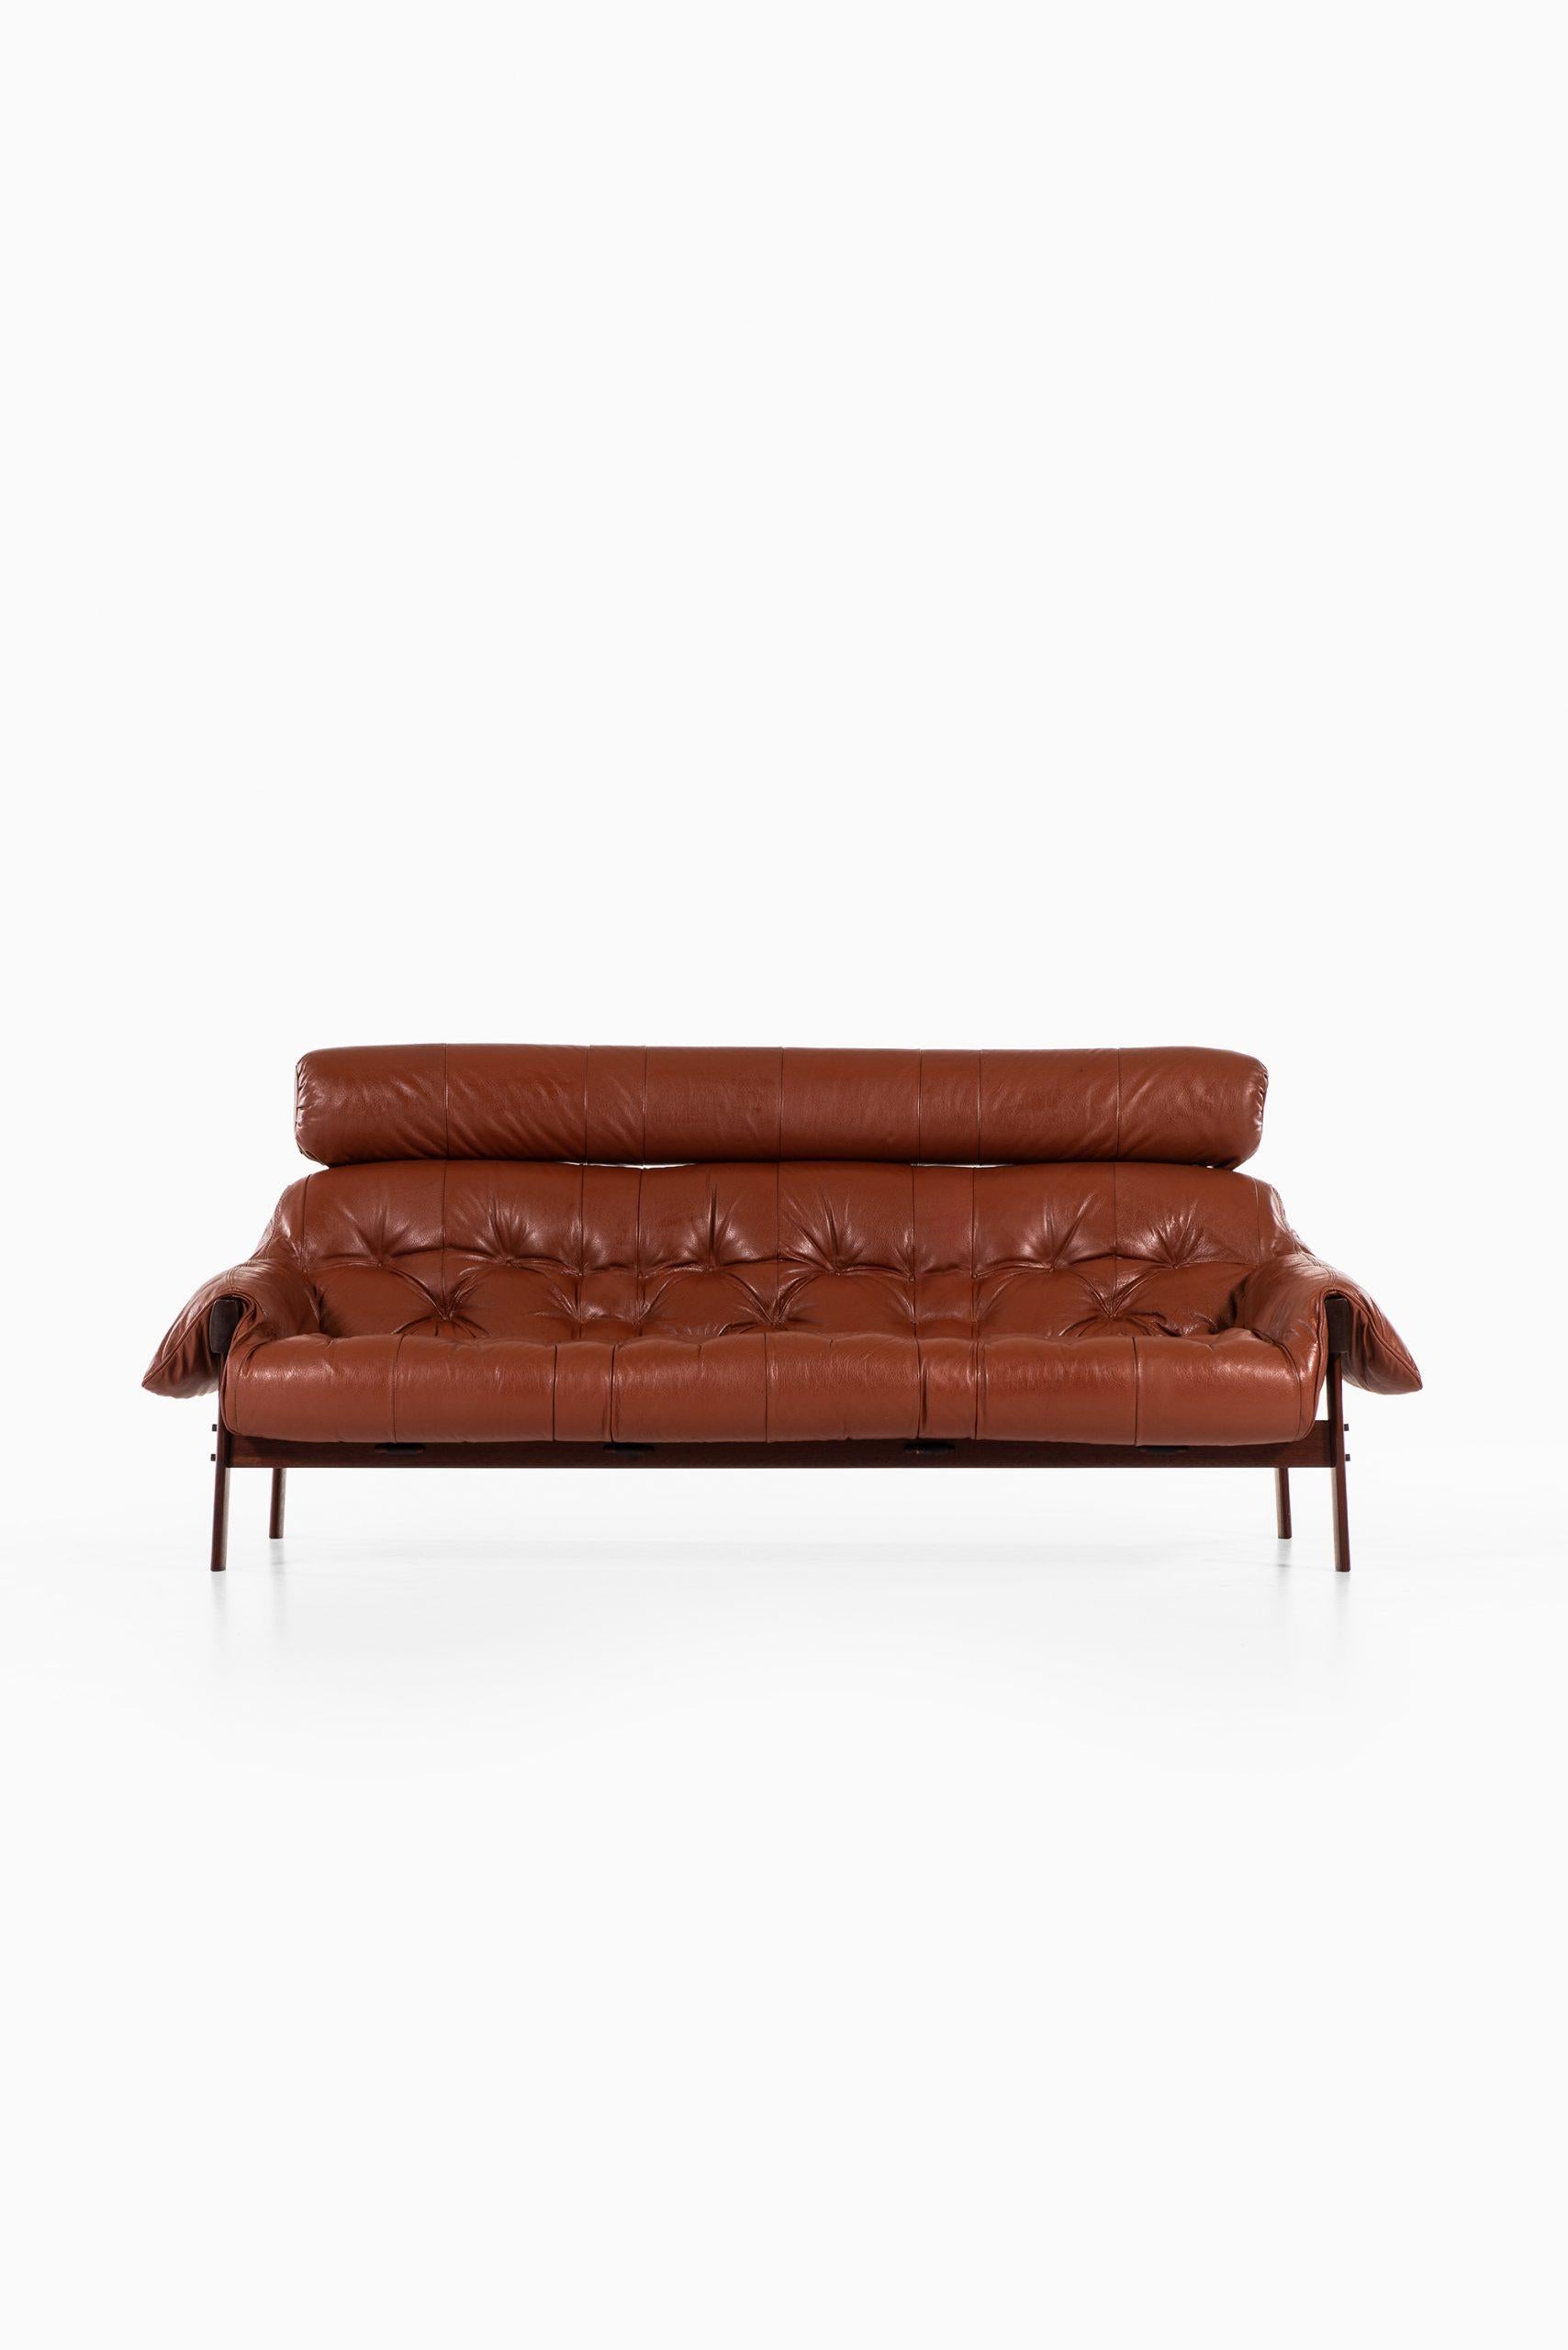 Rare 3-seat sofa, 2-seat sofa and easy chair designed by Percival Lafer. Produced by Lafer MP in Brazil.
Dimensions 3-seat sofa (W x D x H): 200 x 100 x 85 cm, SH: 38 cm
Dimensions 2-seat sofa (W x D x H): 155 x 100 x 85 cm, SH: 38 cm
Dimensions